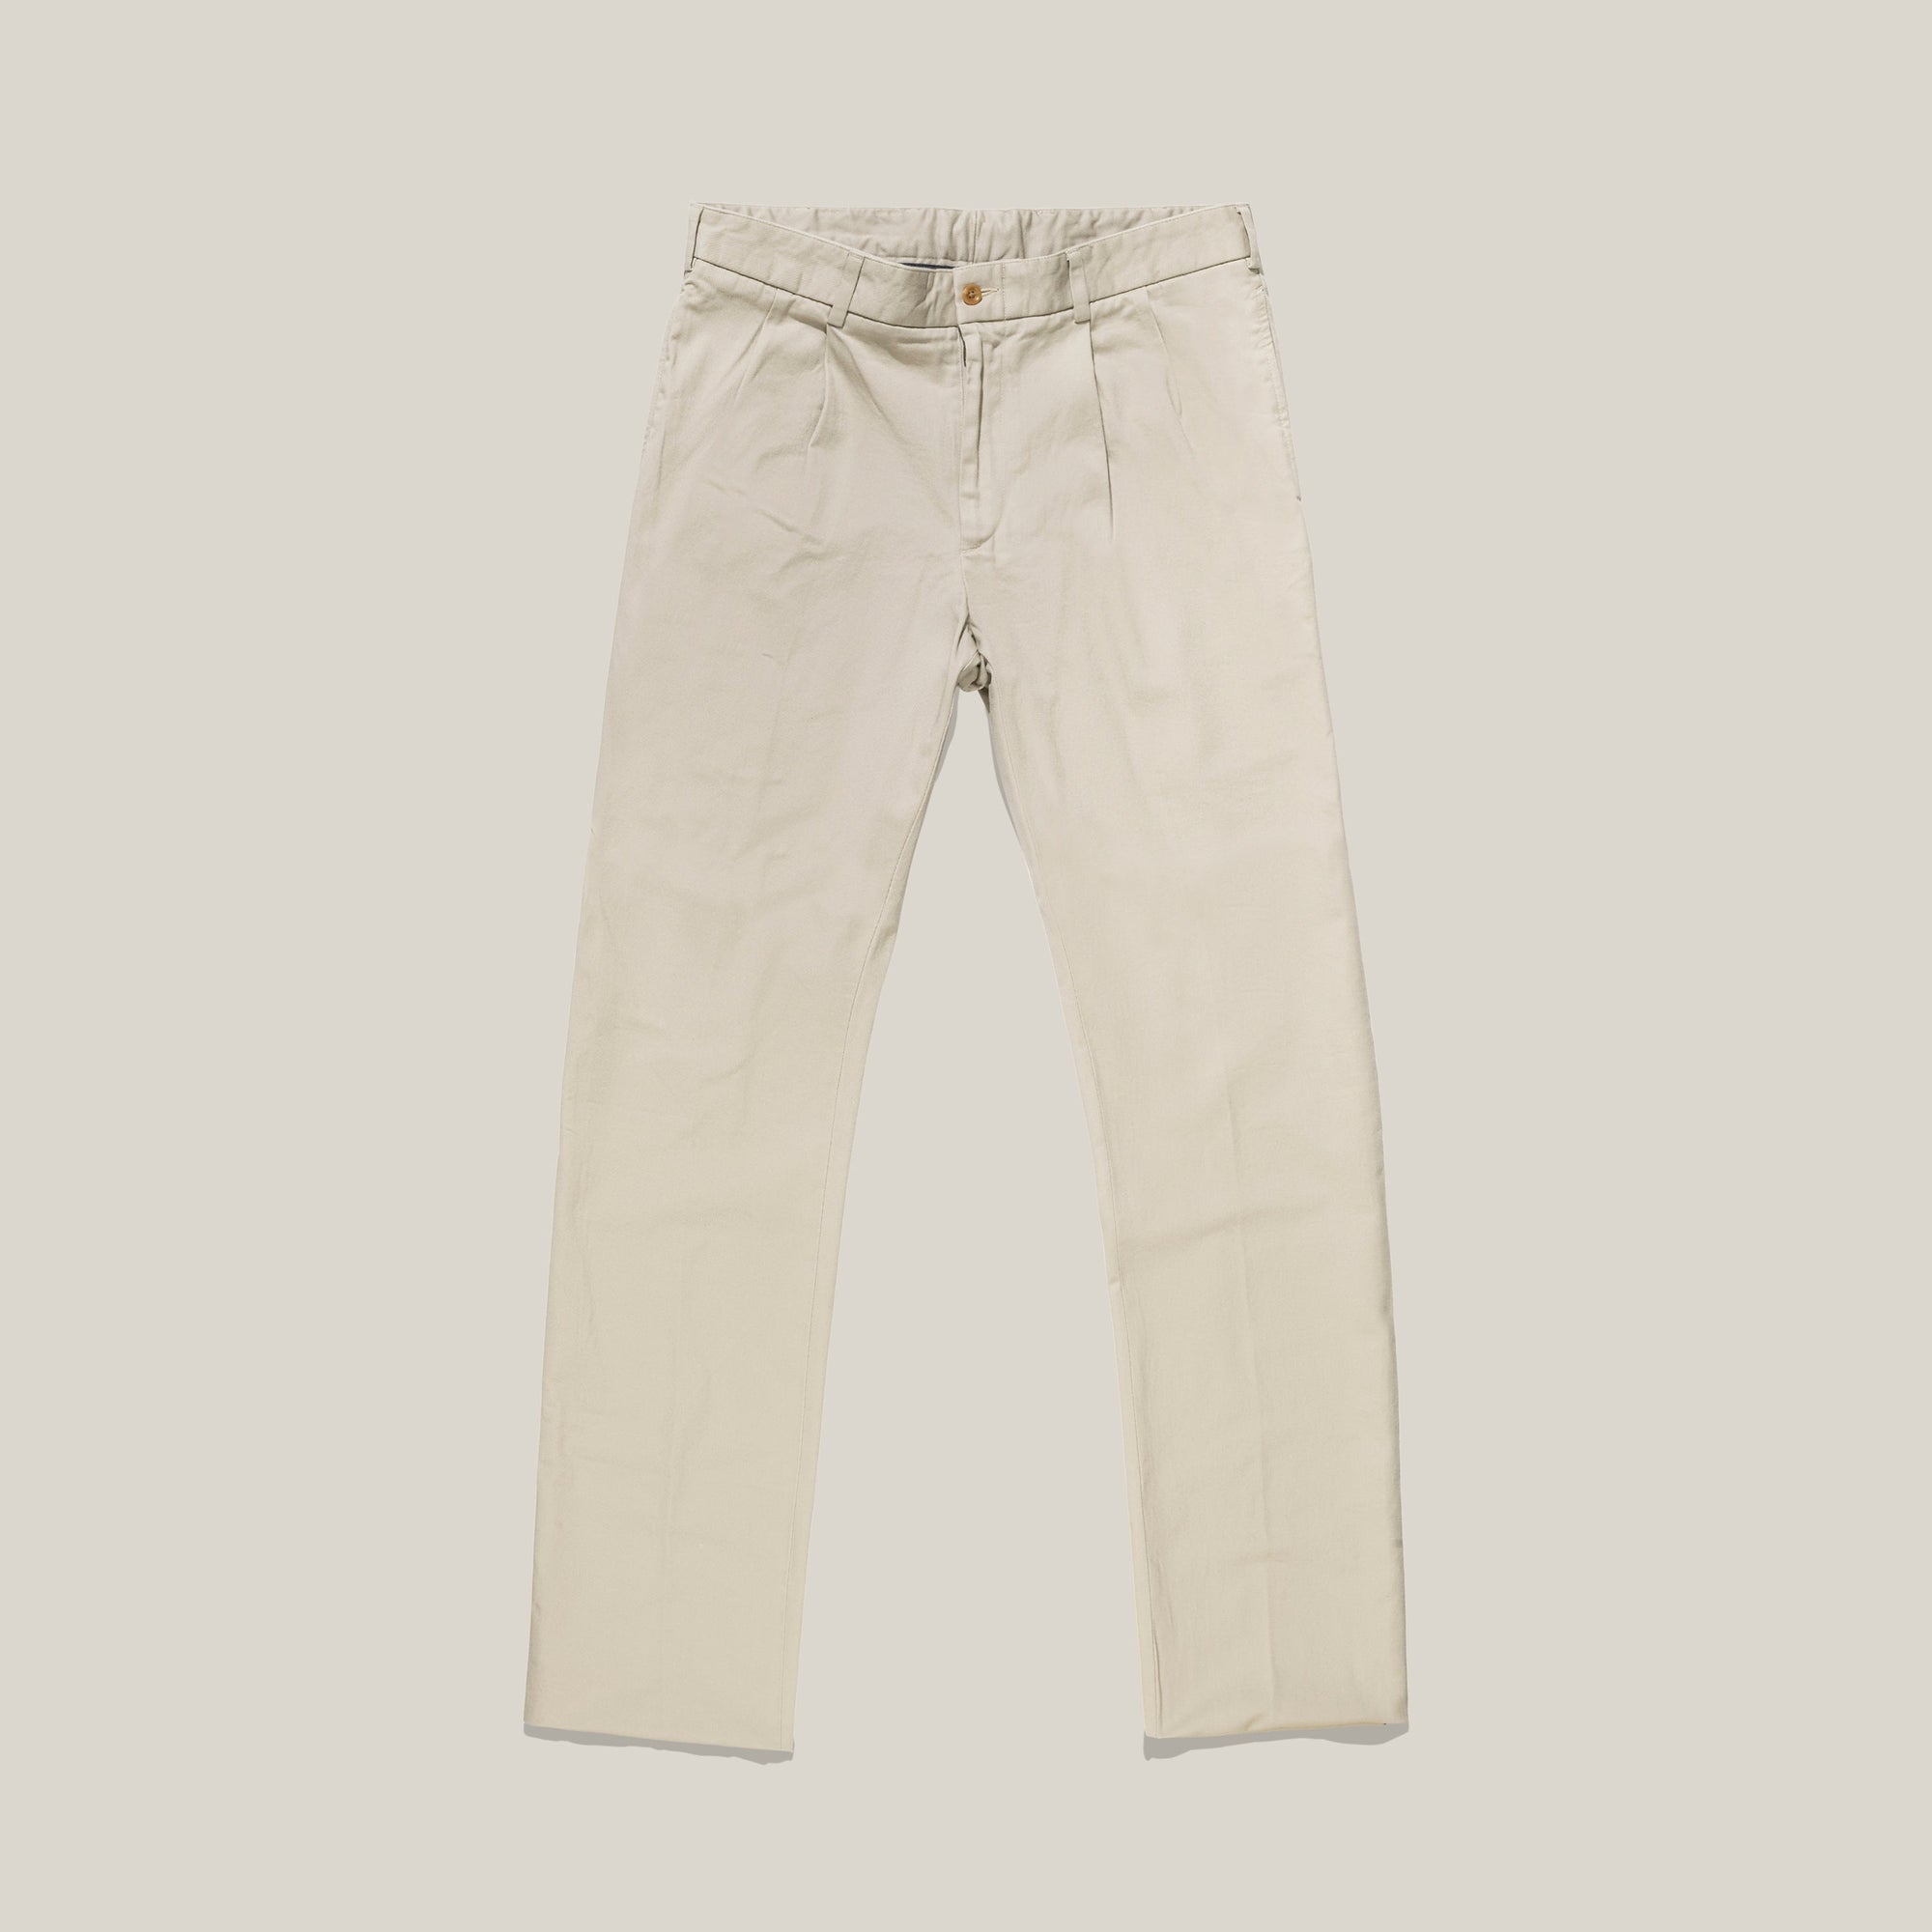 M2P Pleated Classic Fit Original Twills in Cement by Bills Khakis